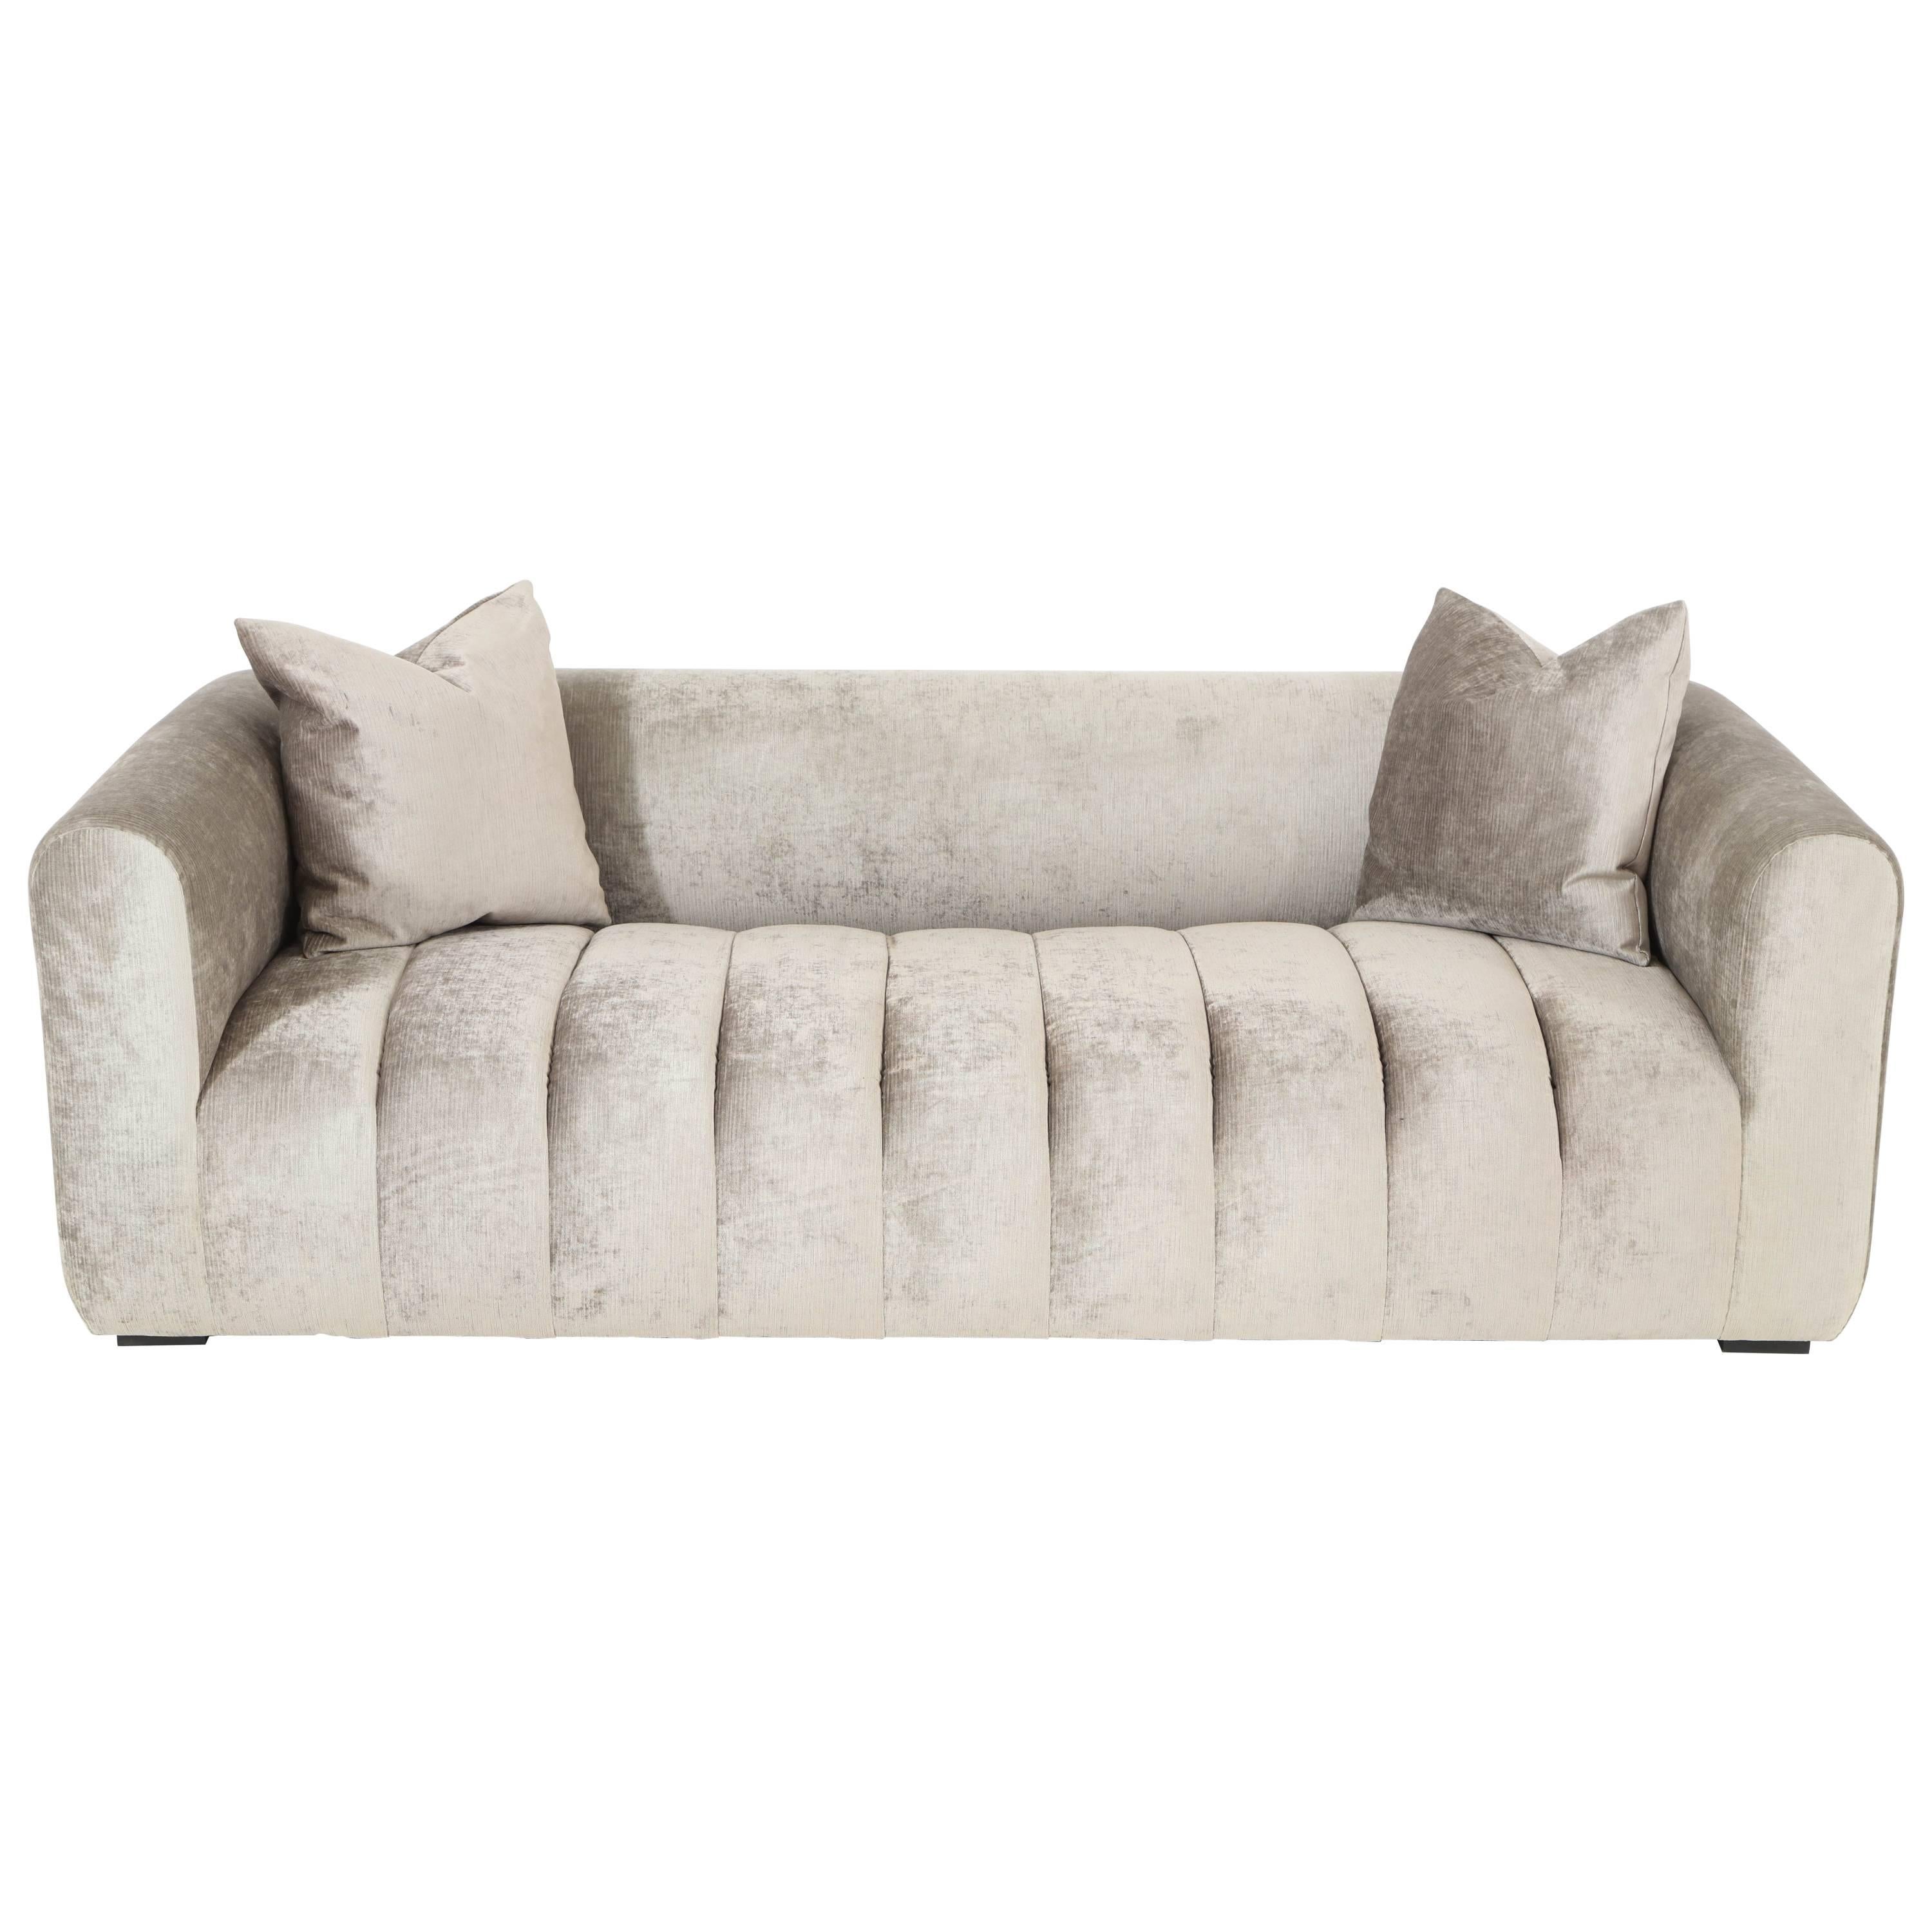 Stunning Channel Sofa by Steve Chase offered by Prime Gallery